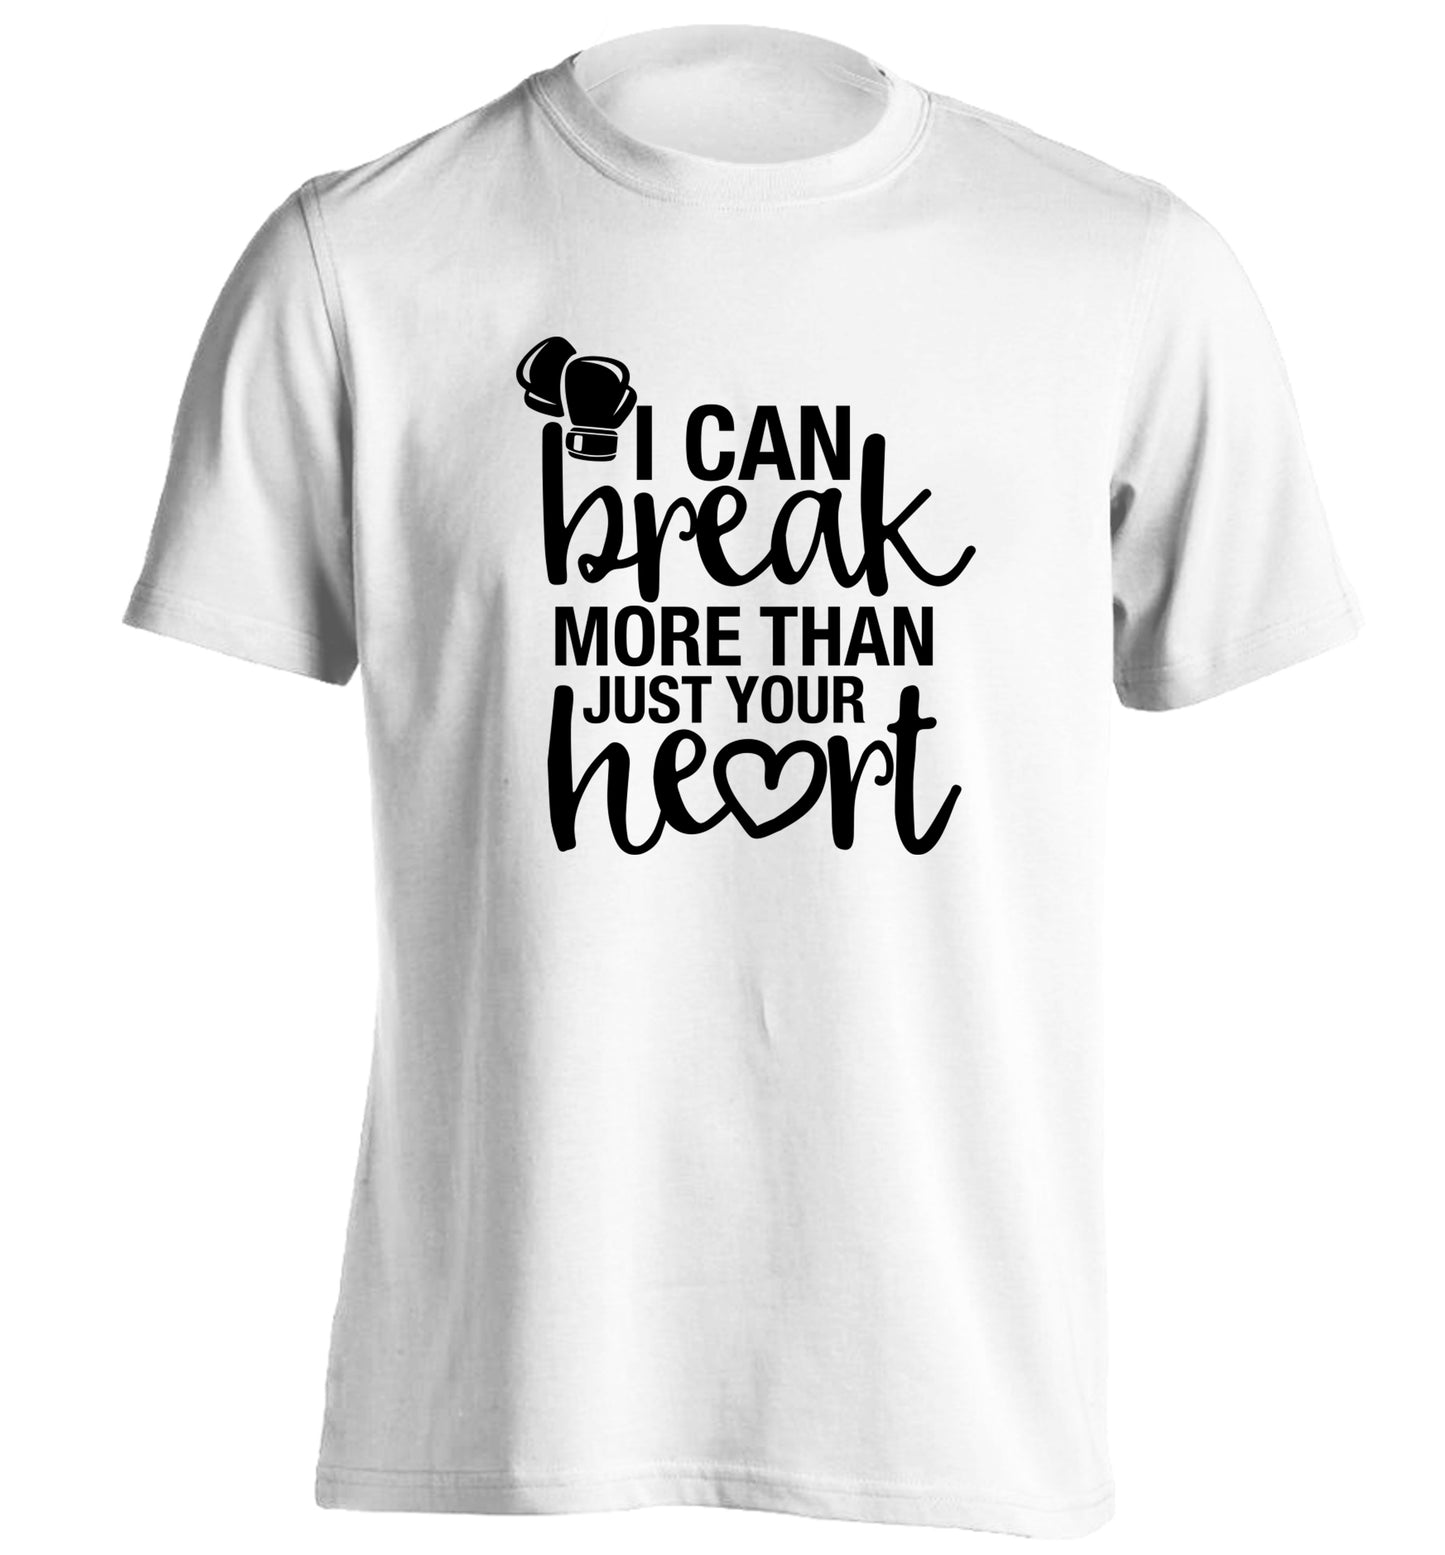 I can break more than just your heart adults unisex white Tshirt 2XL